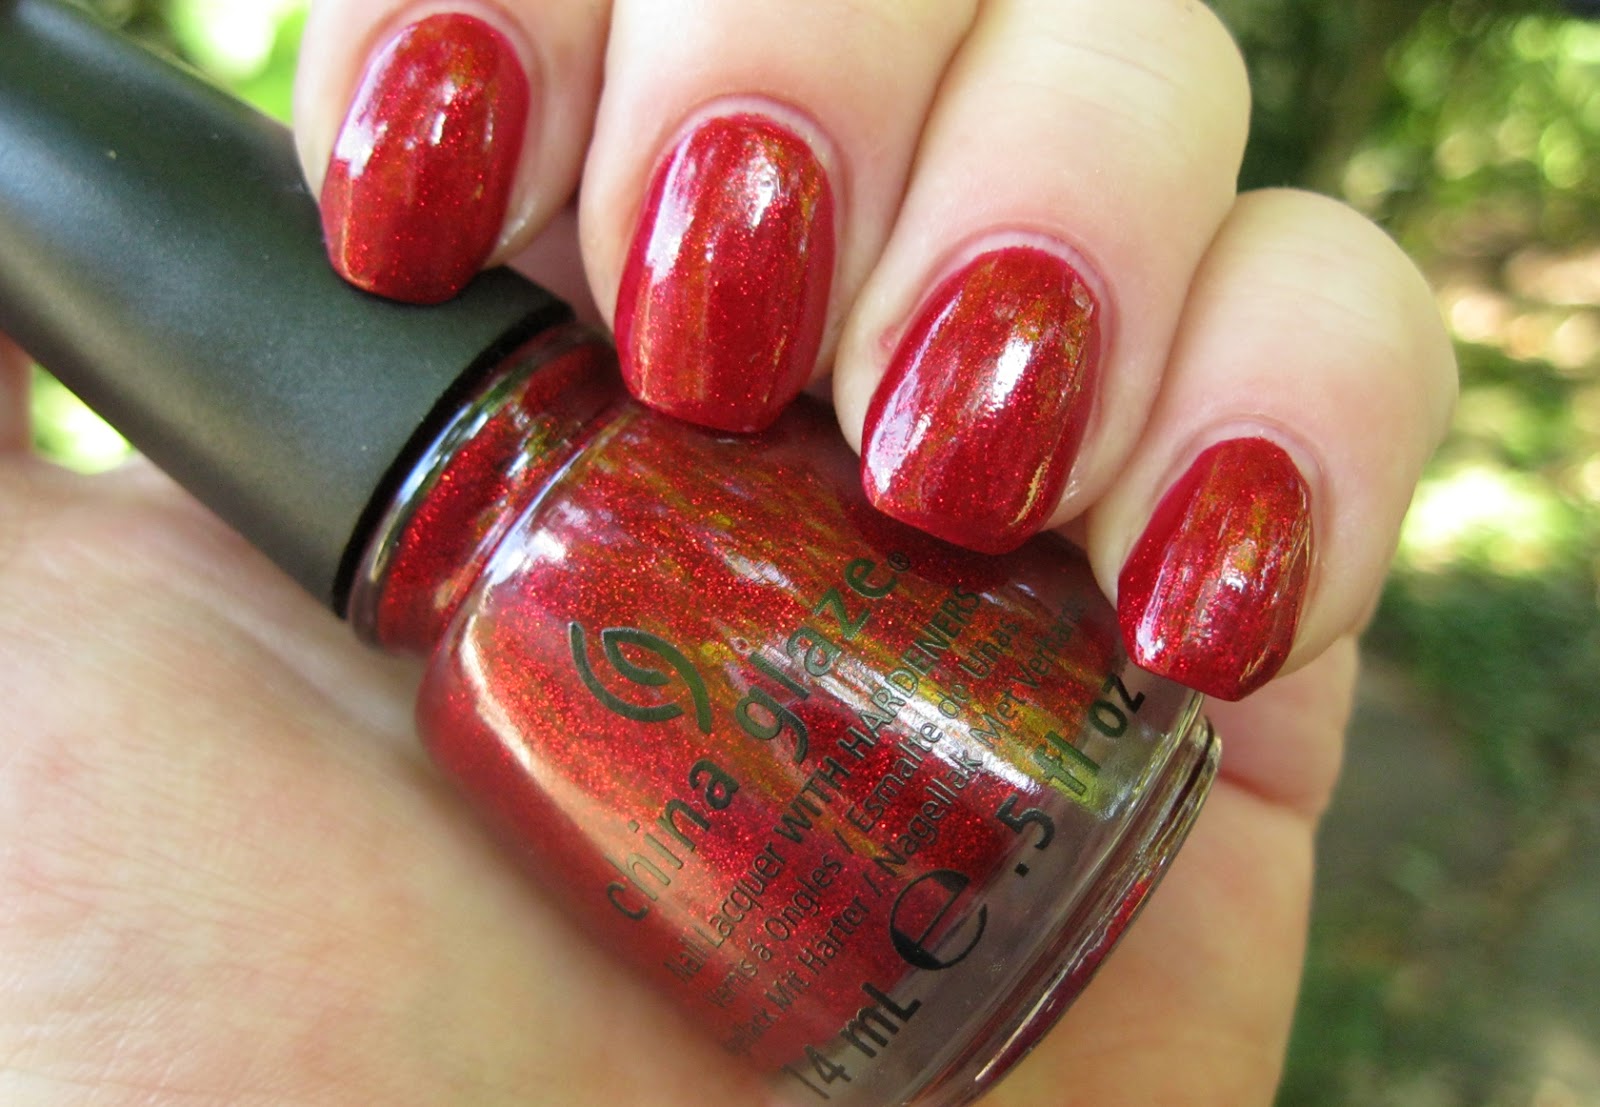 8. China Glaze Nail Lacquer in "Ruby Pumps" - wide 6